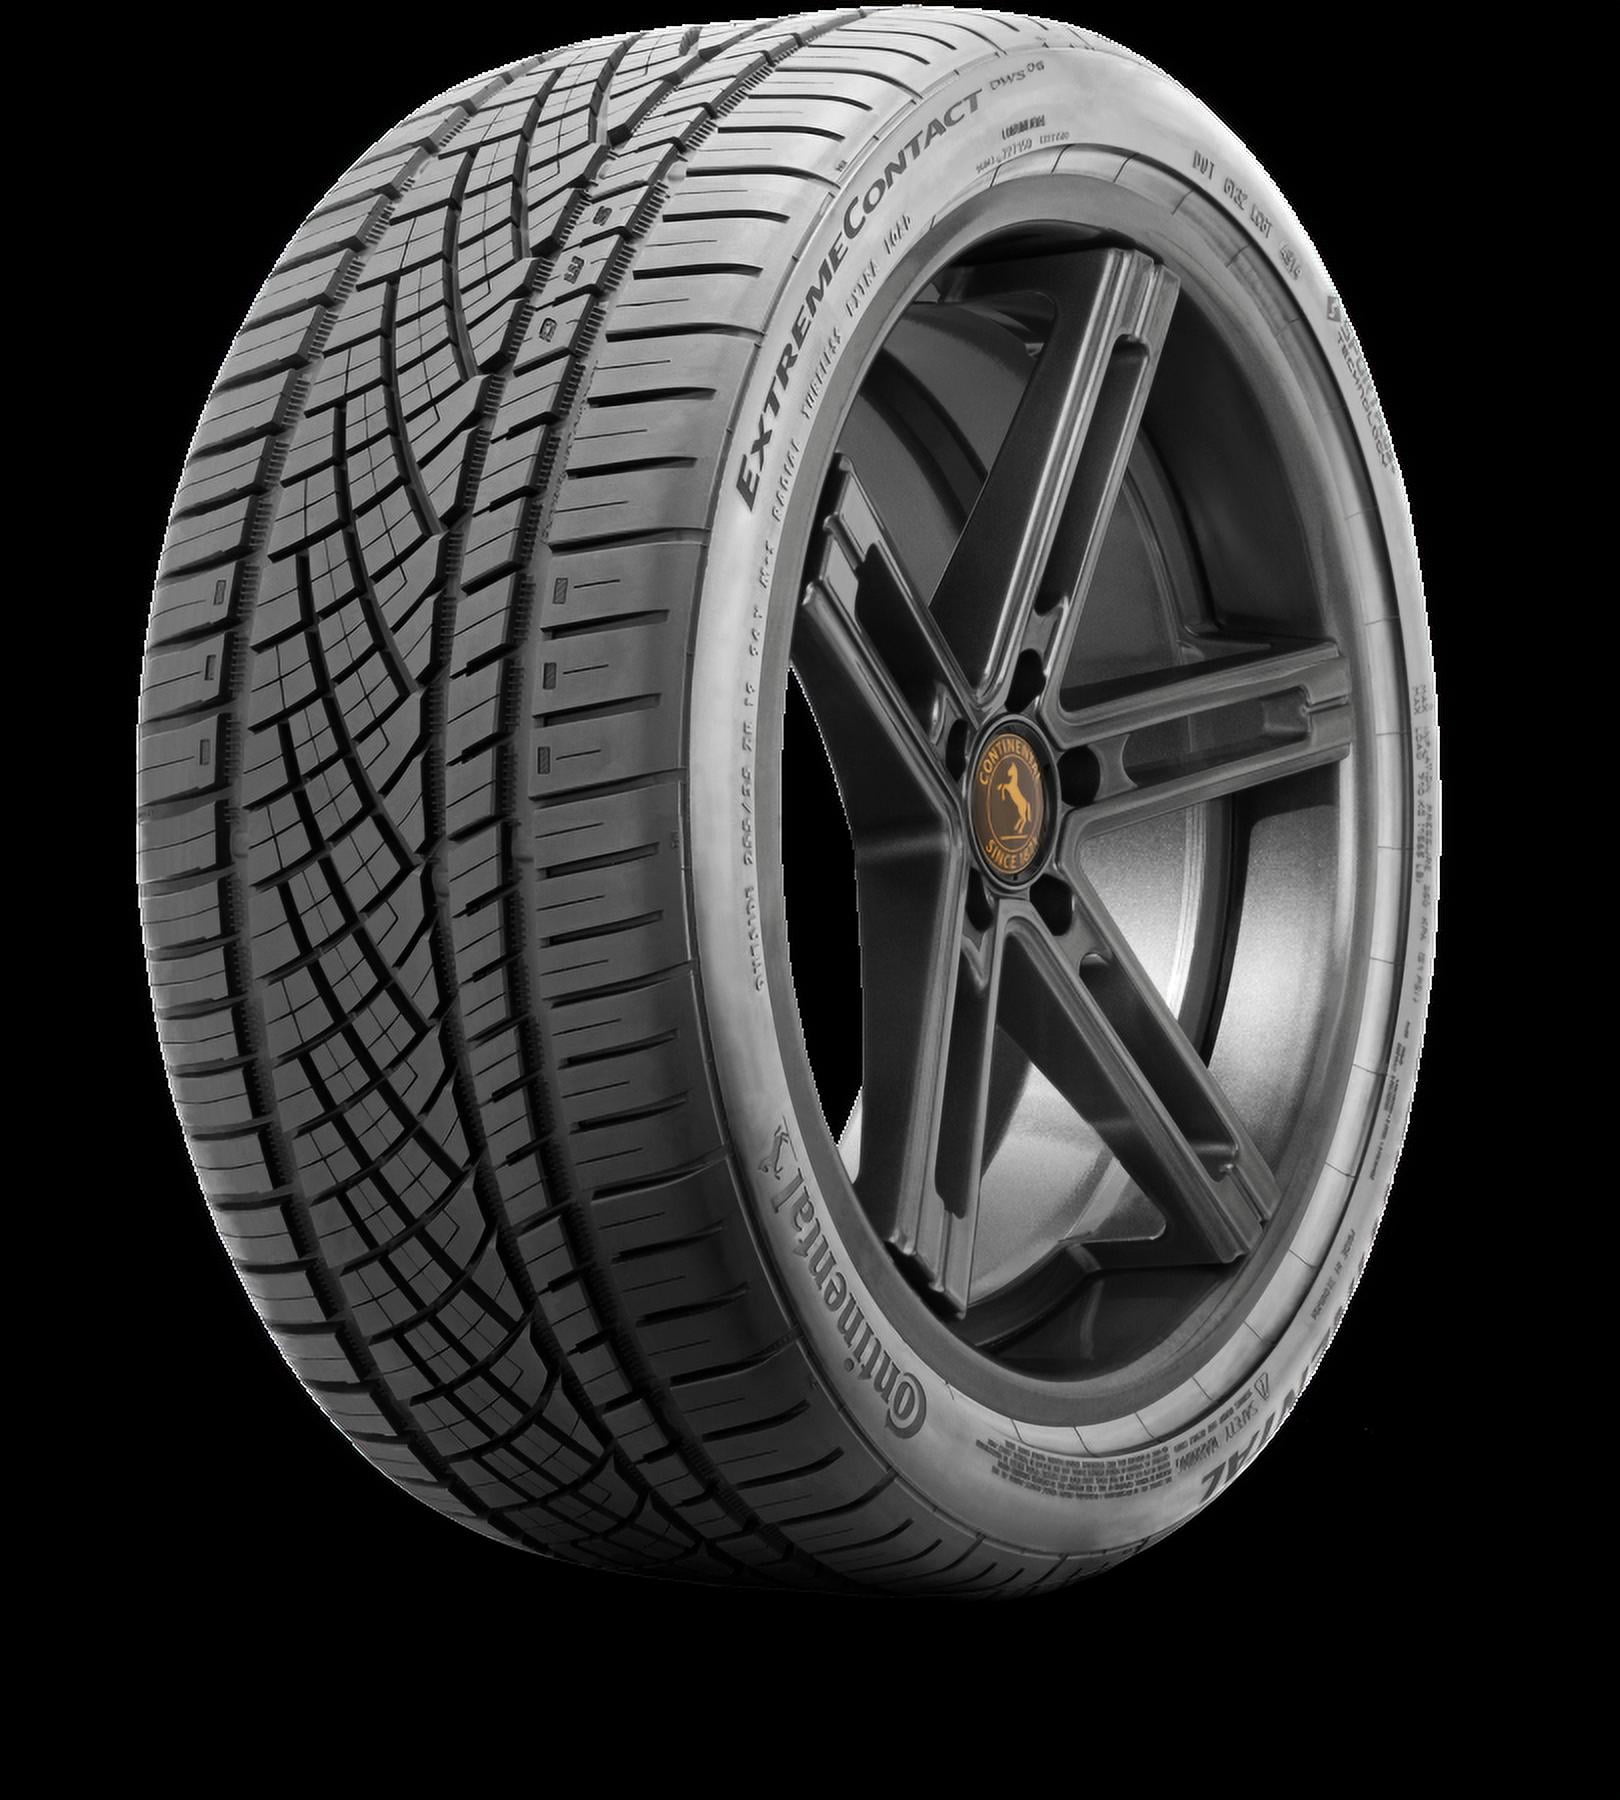 1 NEW 235/35-19 CONTINENTAL EXTREME CONTACT DWS6 35R R19 TIRE 88332